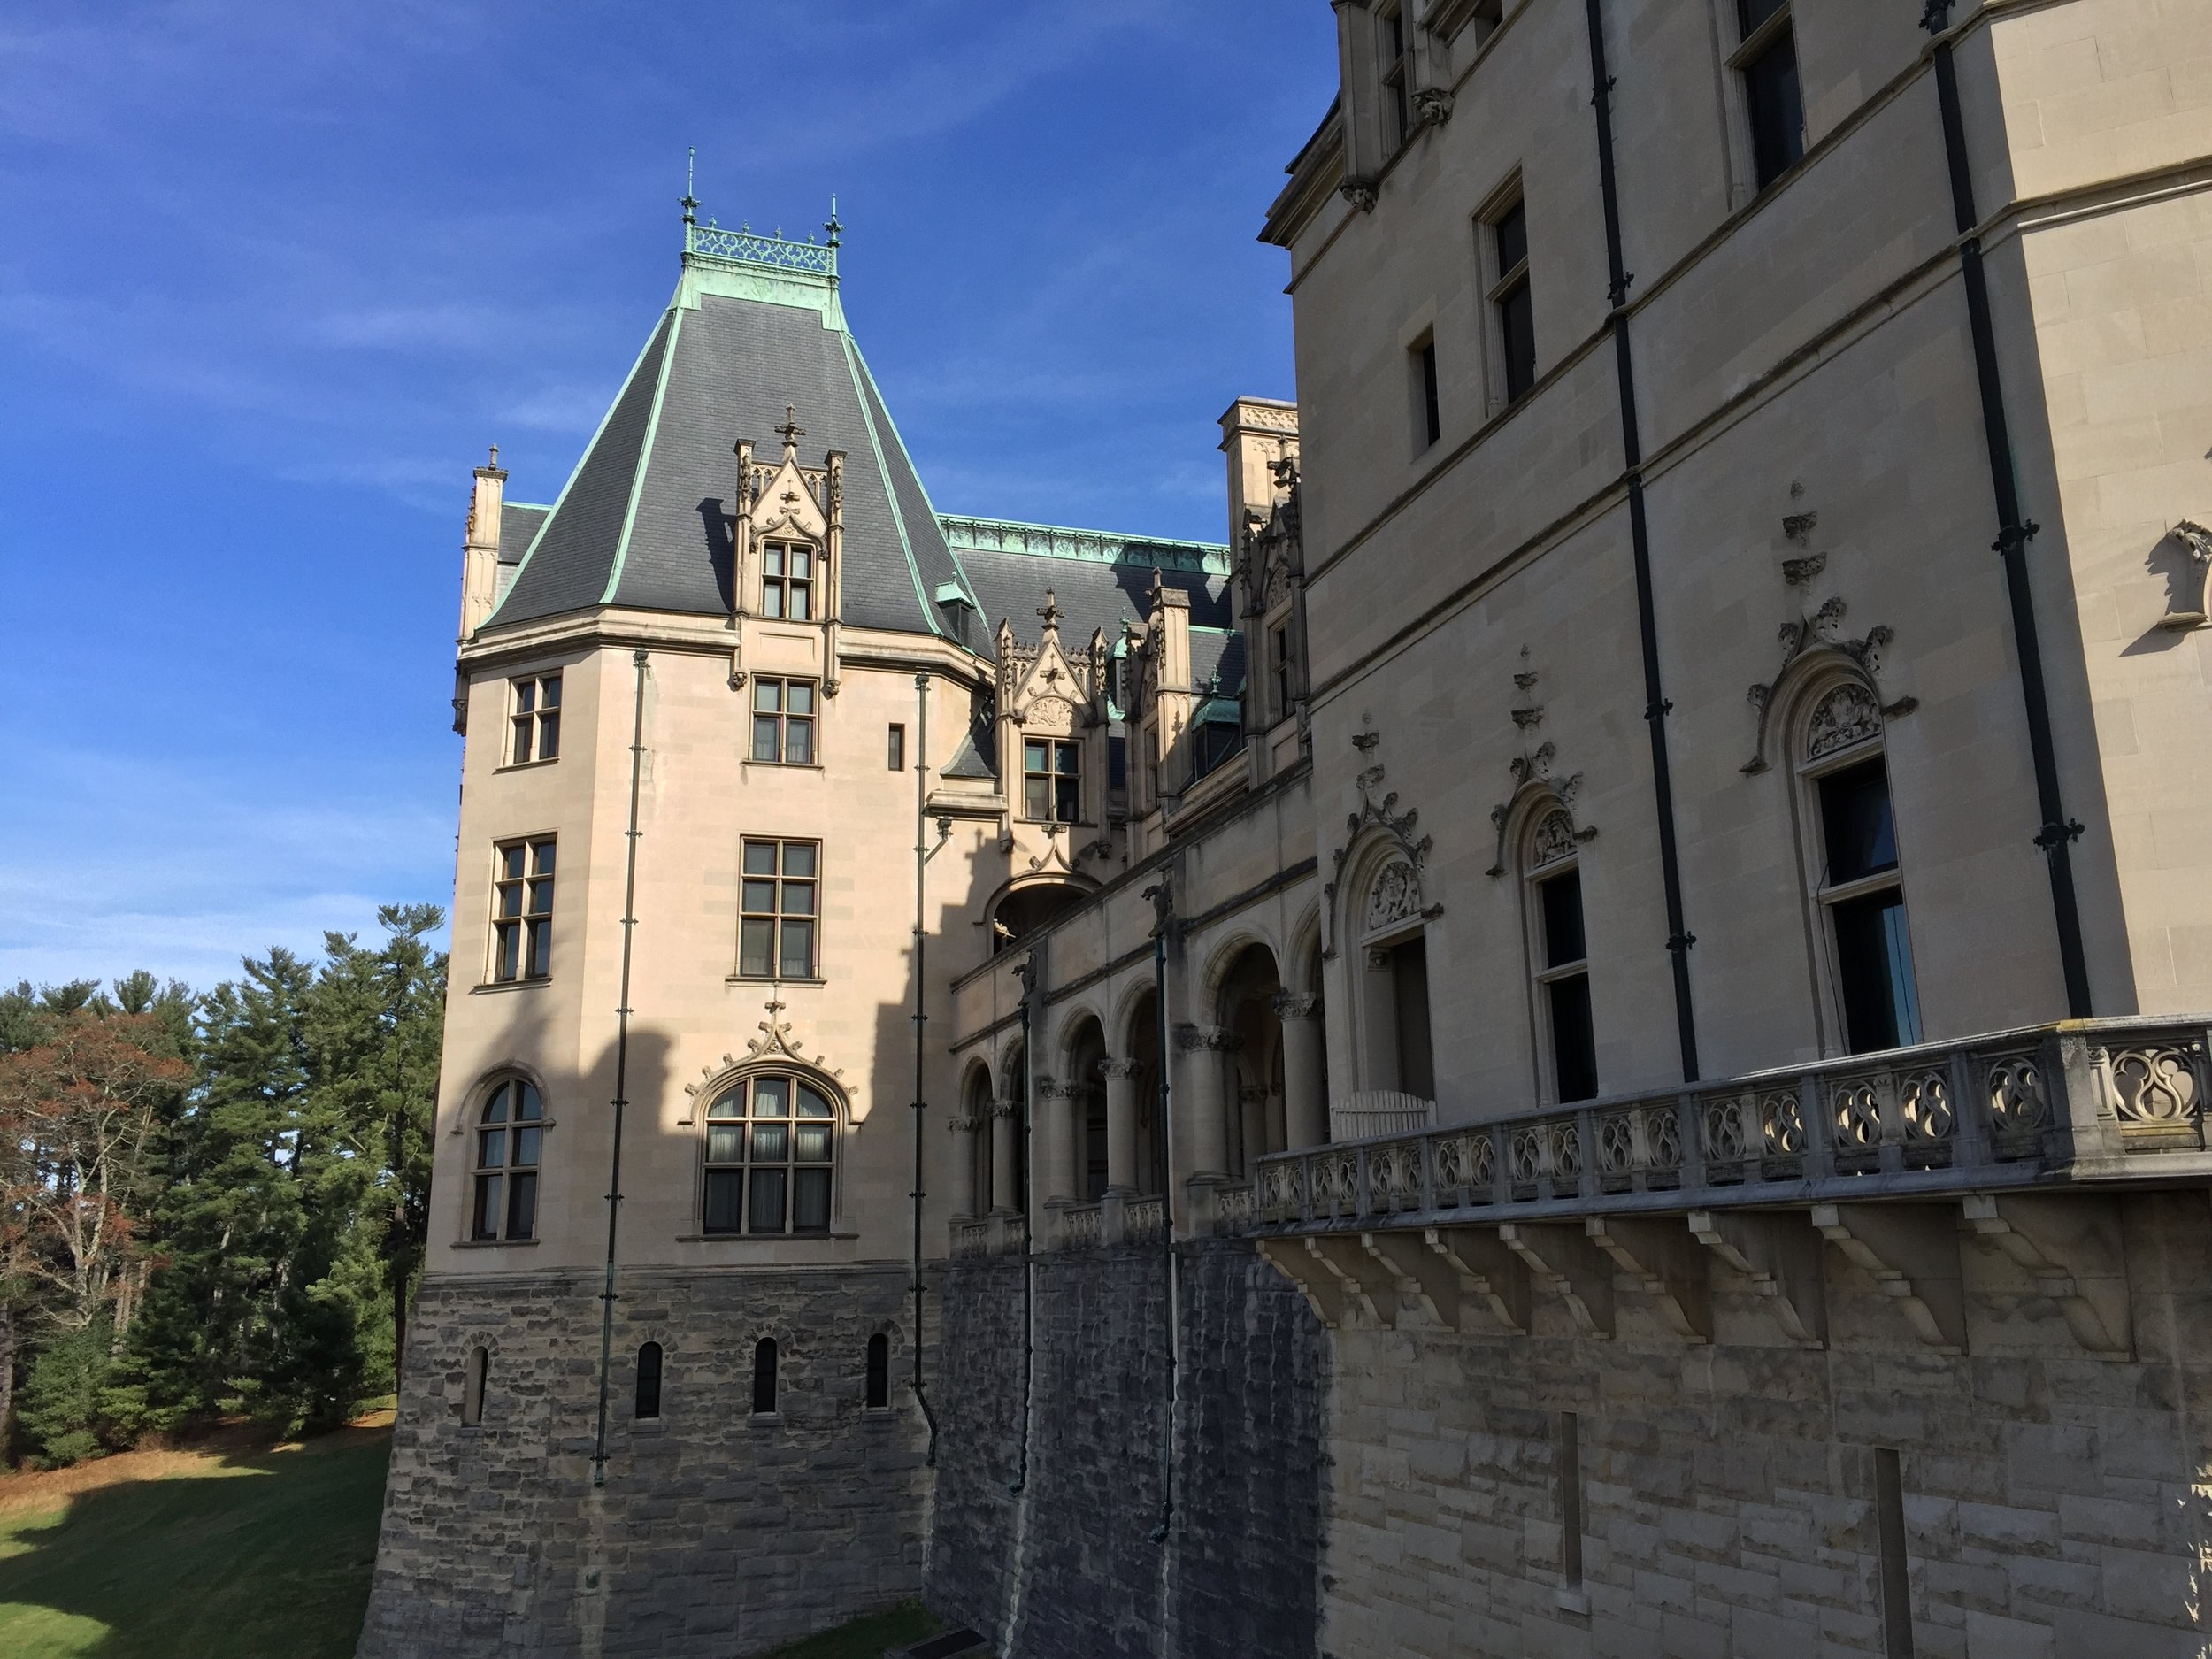 View of Biltmore House from the adjacent terrace.